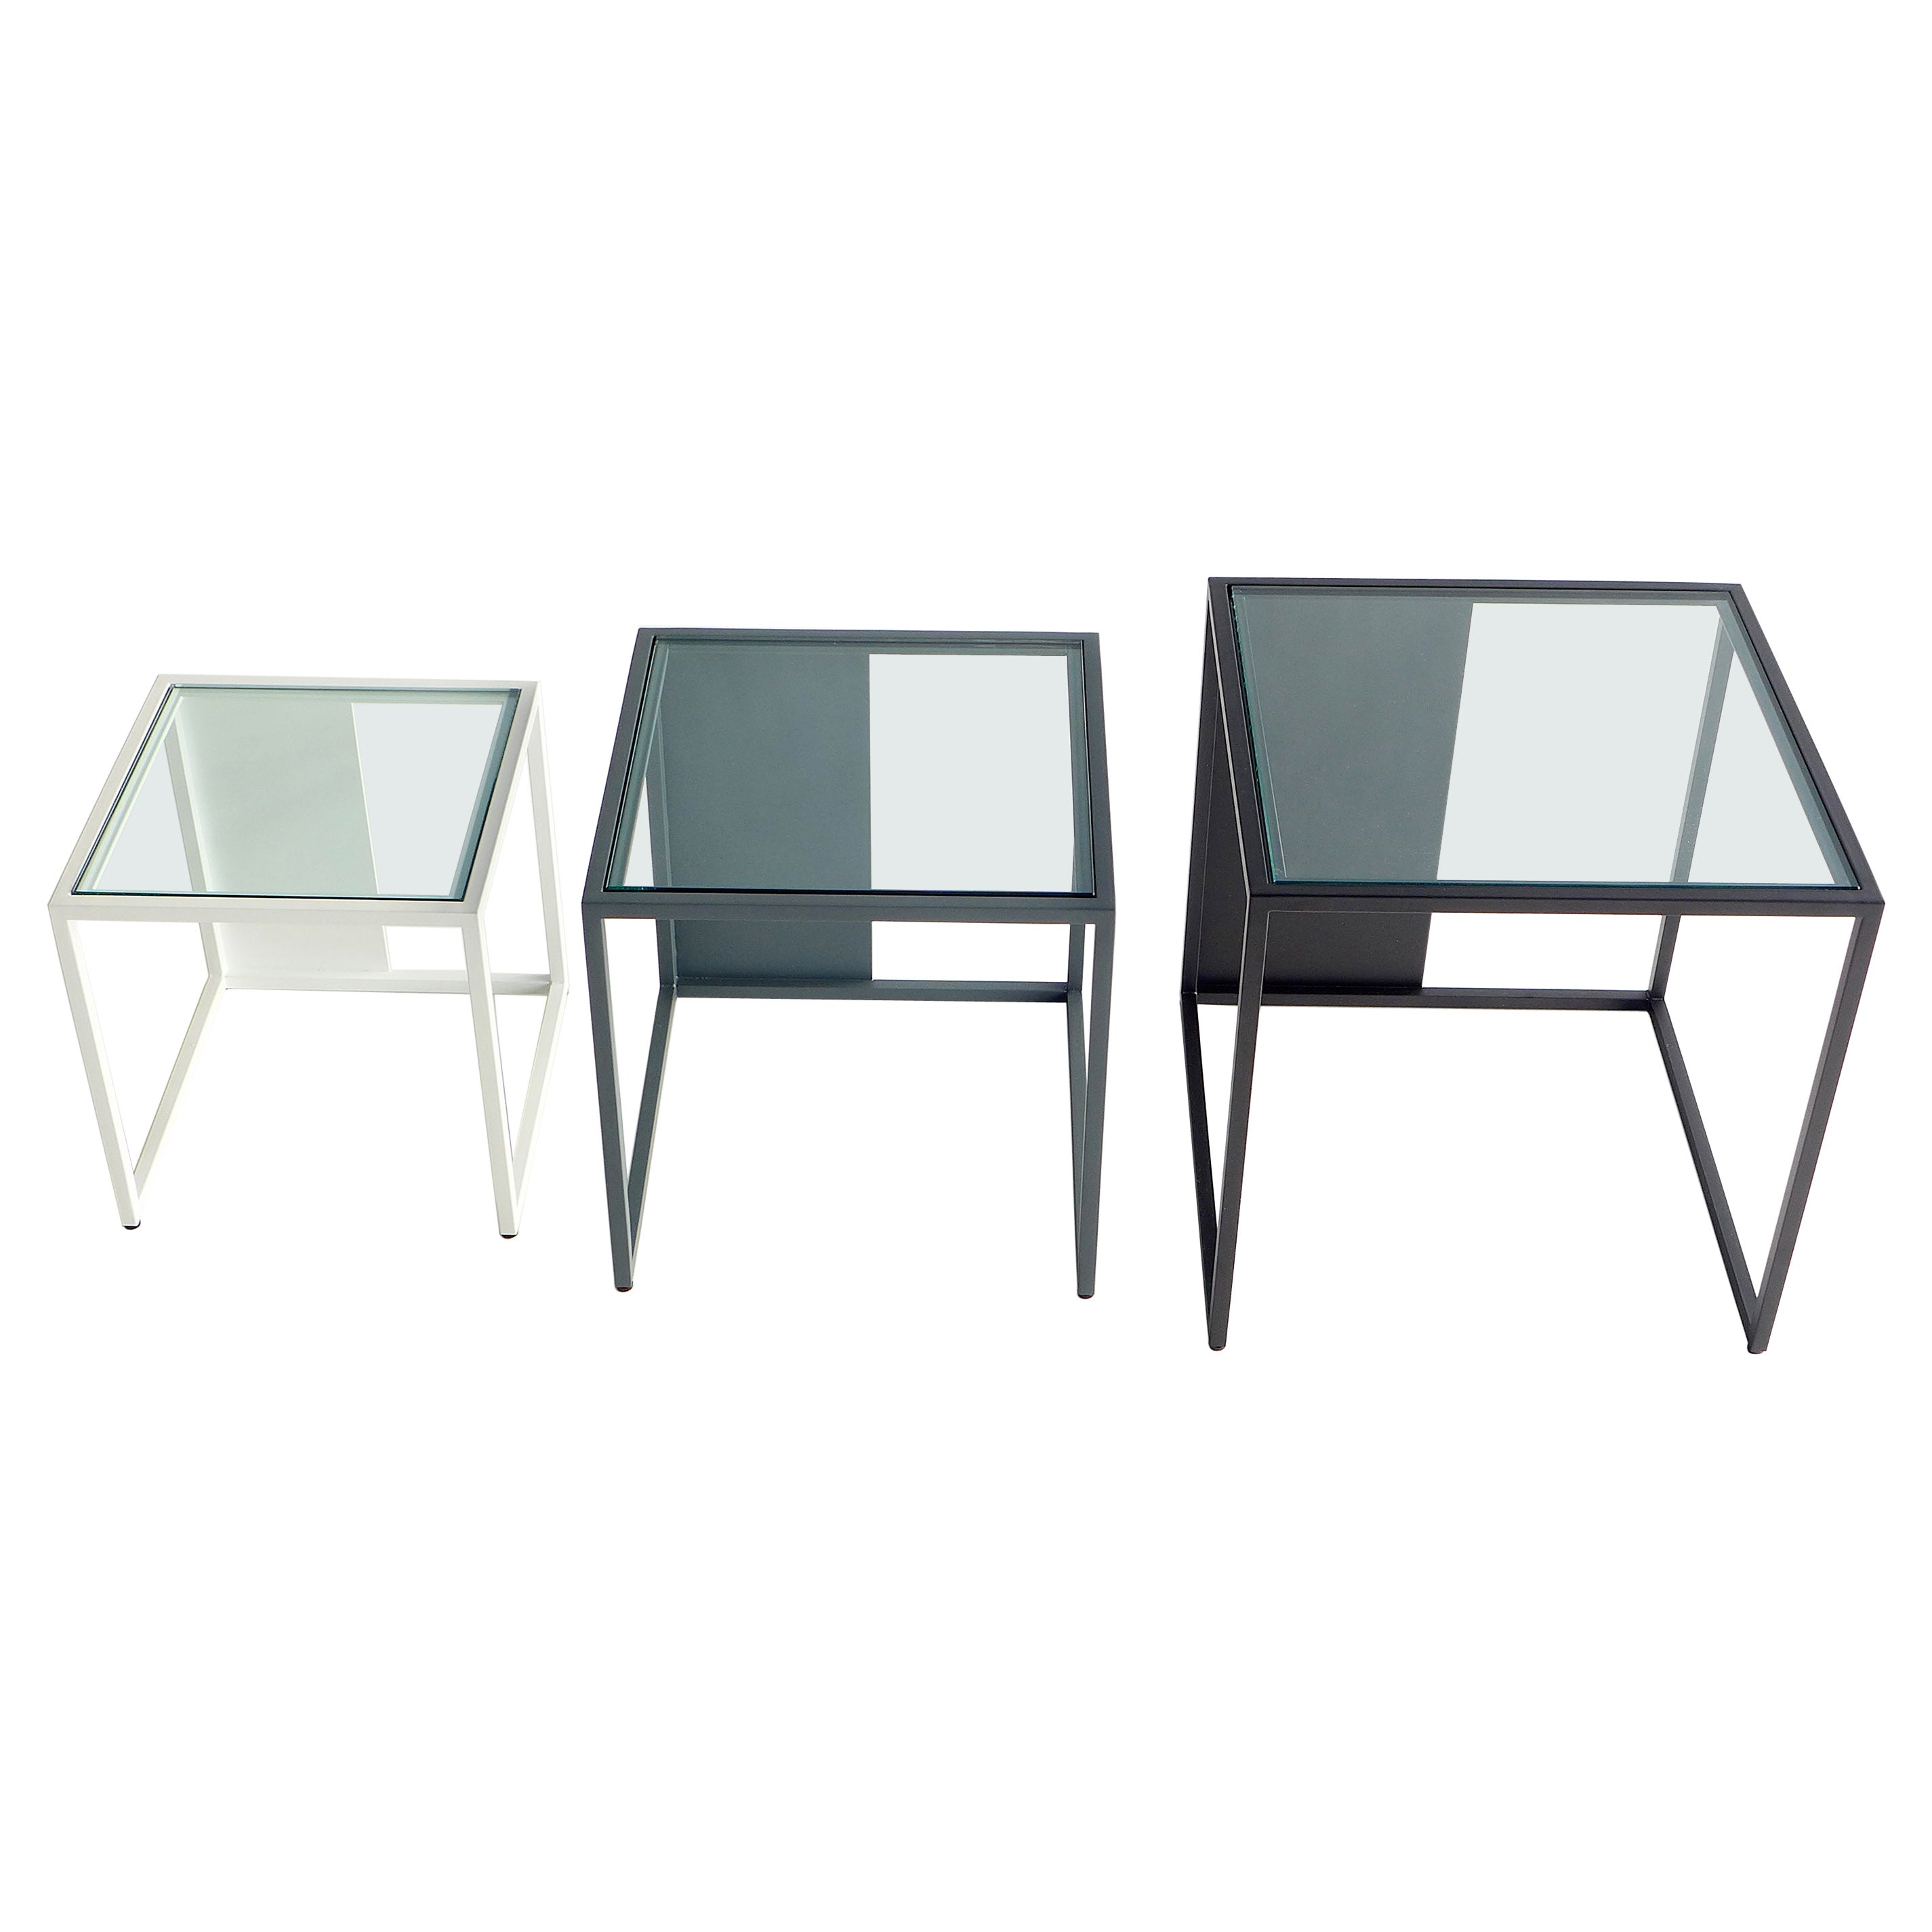 Set Of 3 Half & Half Nesting Tables by Phase Design For Sale